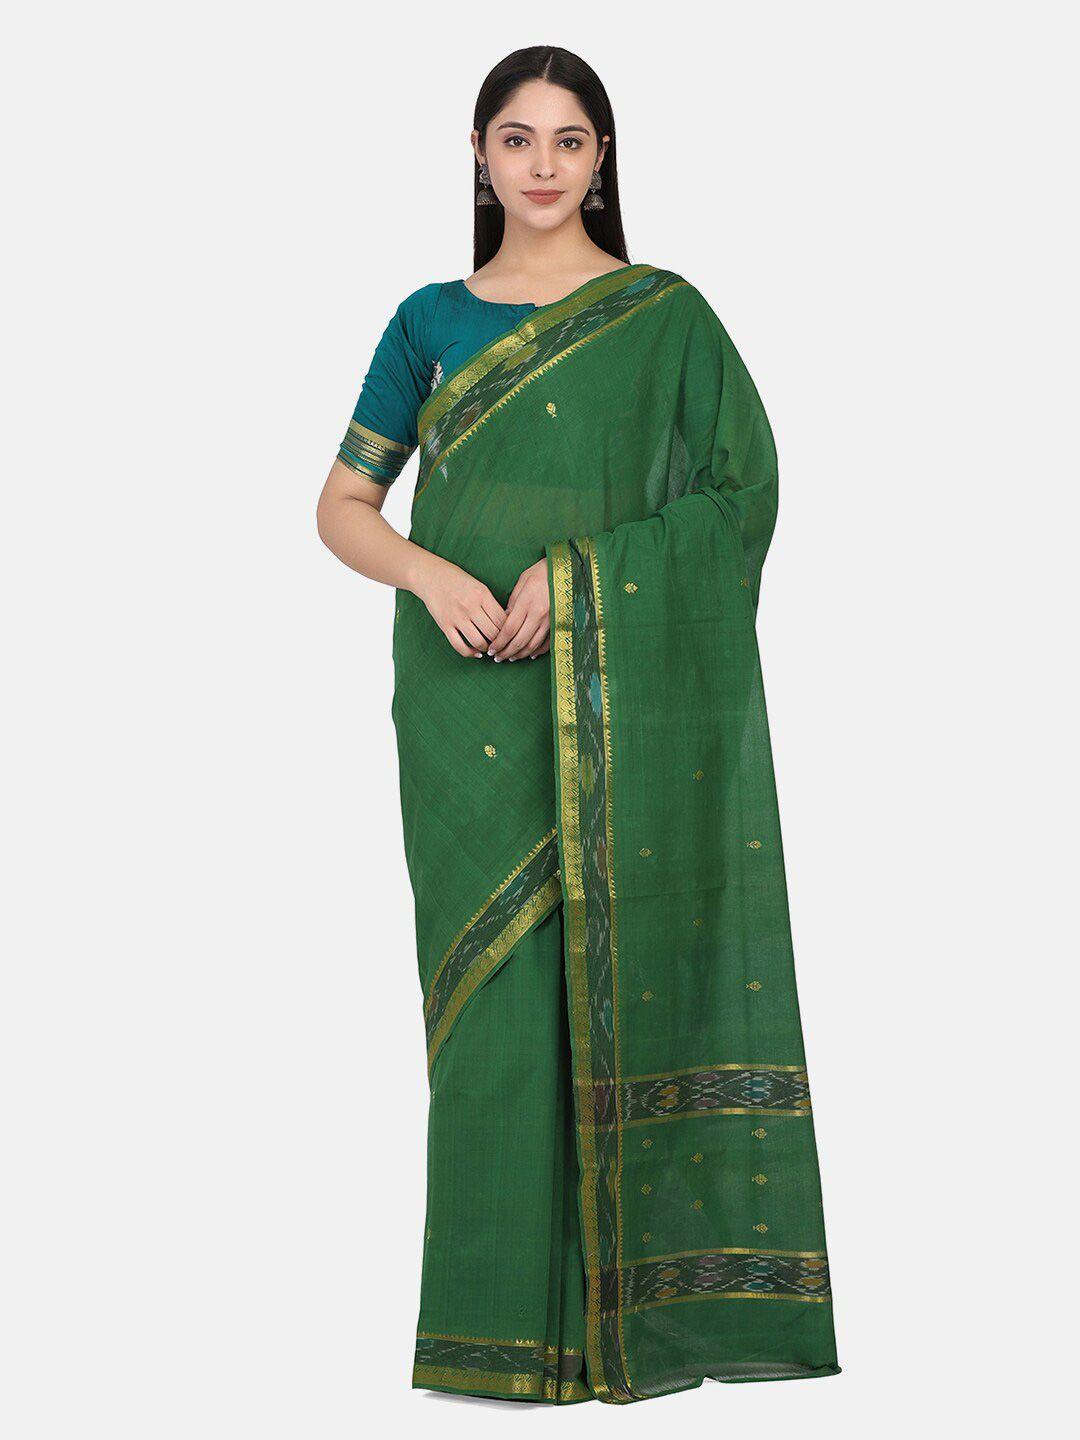 the weave traveller green & gold-toned pure cotton mangalagiri saree